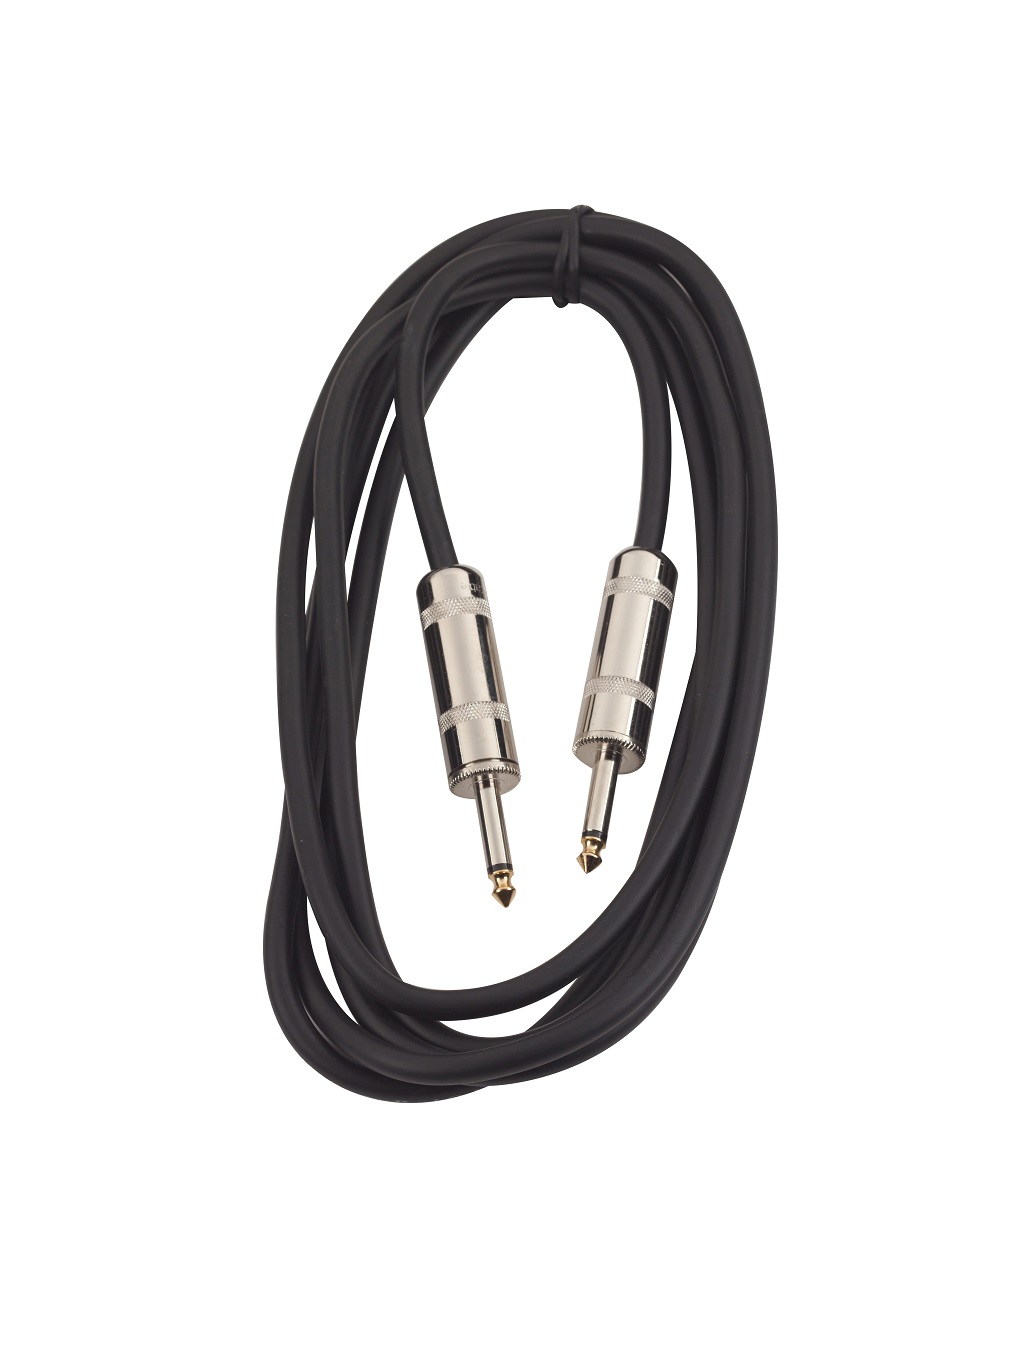 RockCable Speaker Cable - straight TS (6.3 mm / 1/4") - 3 m / 9.8 ft, 7 mm